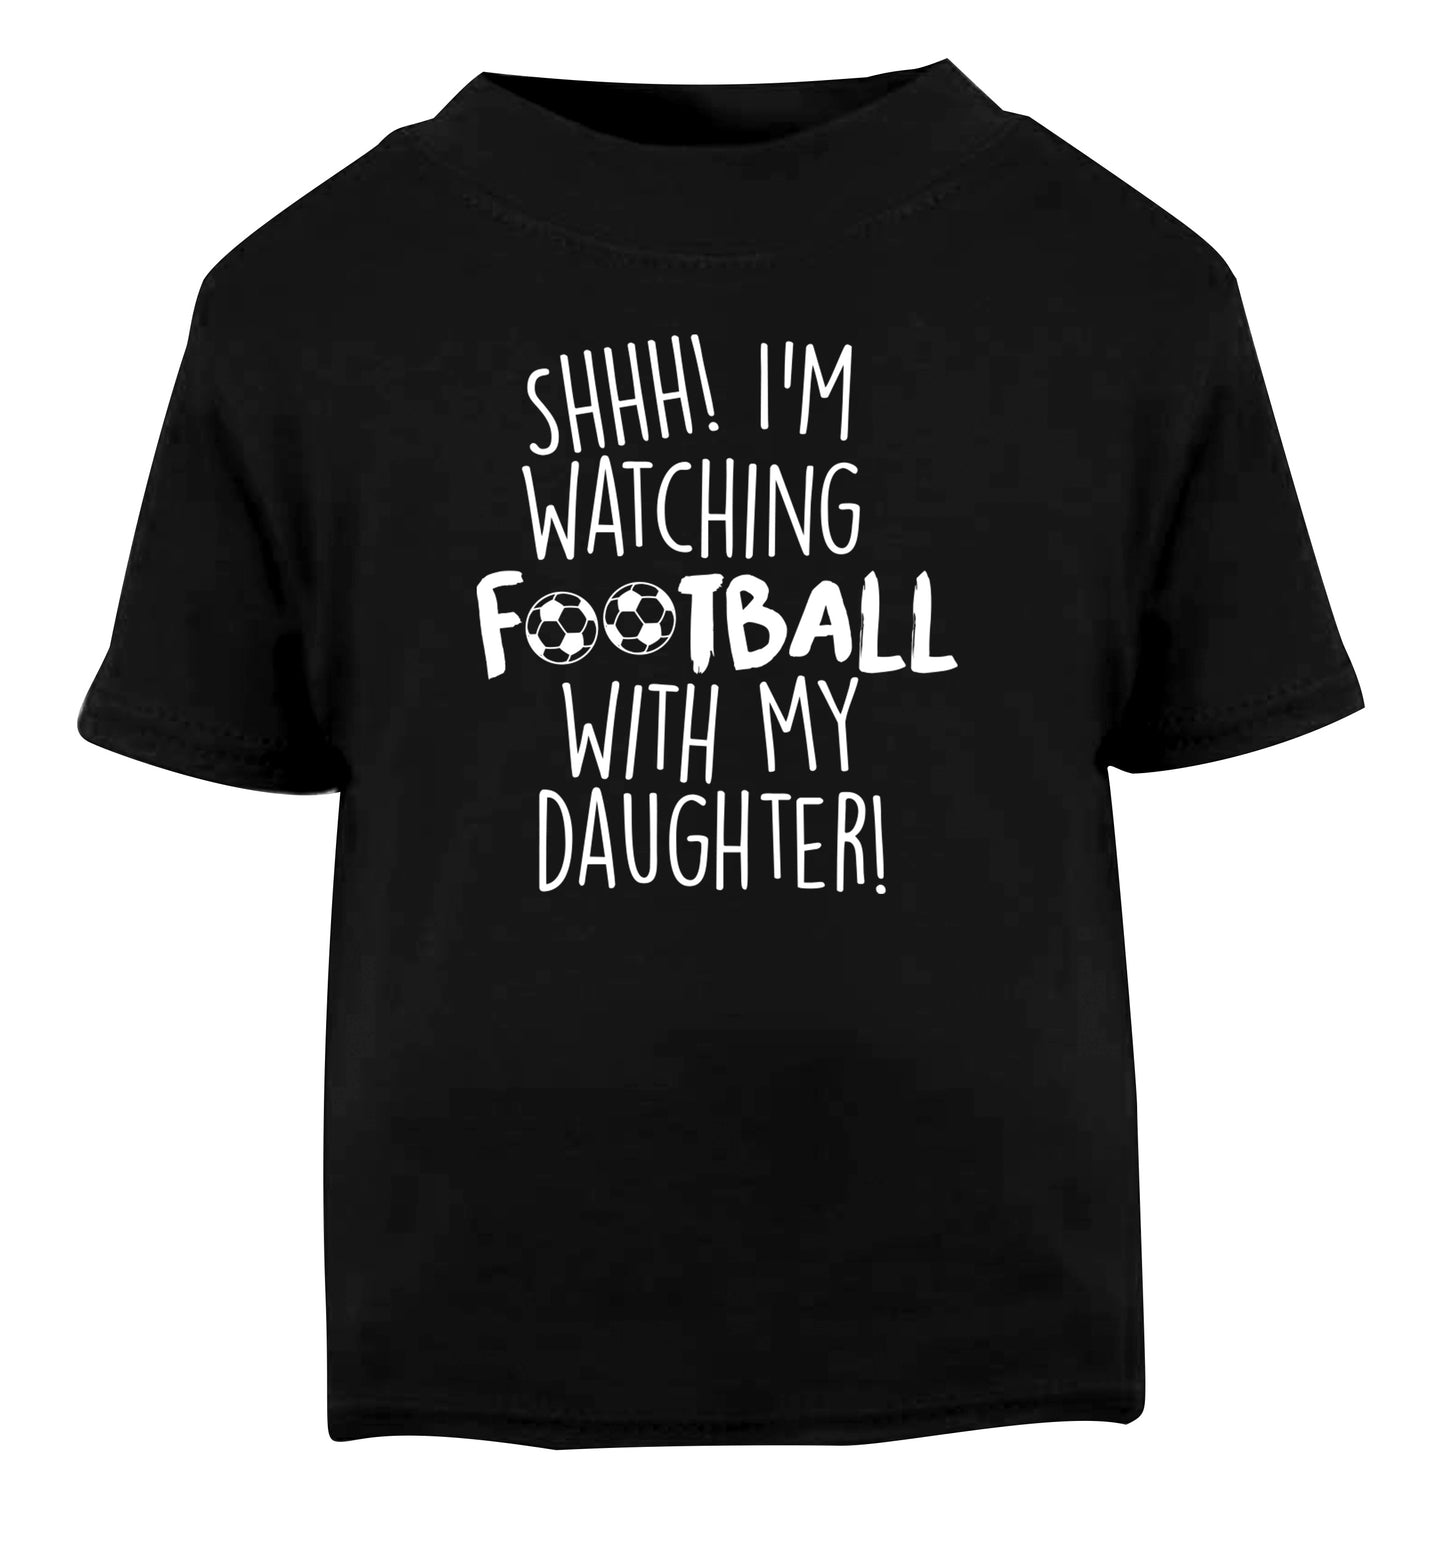 Shhh I'm watching football with my daughter Black Baby Toddler Tshirt 2 years